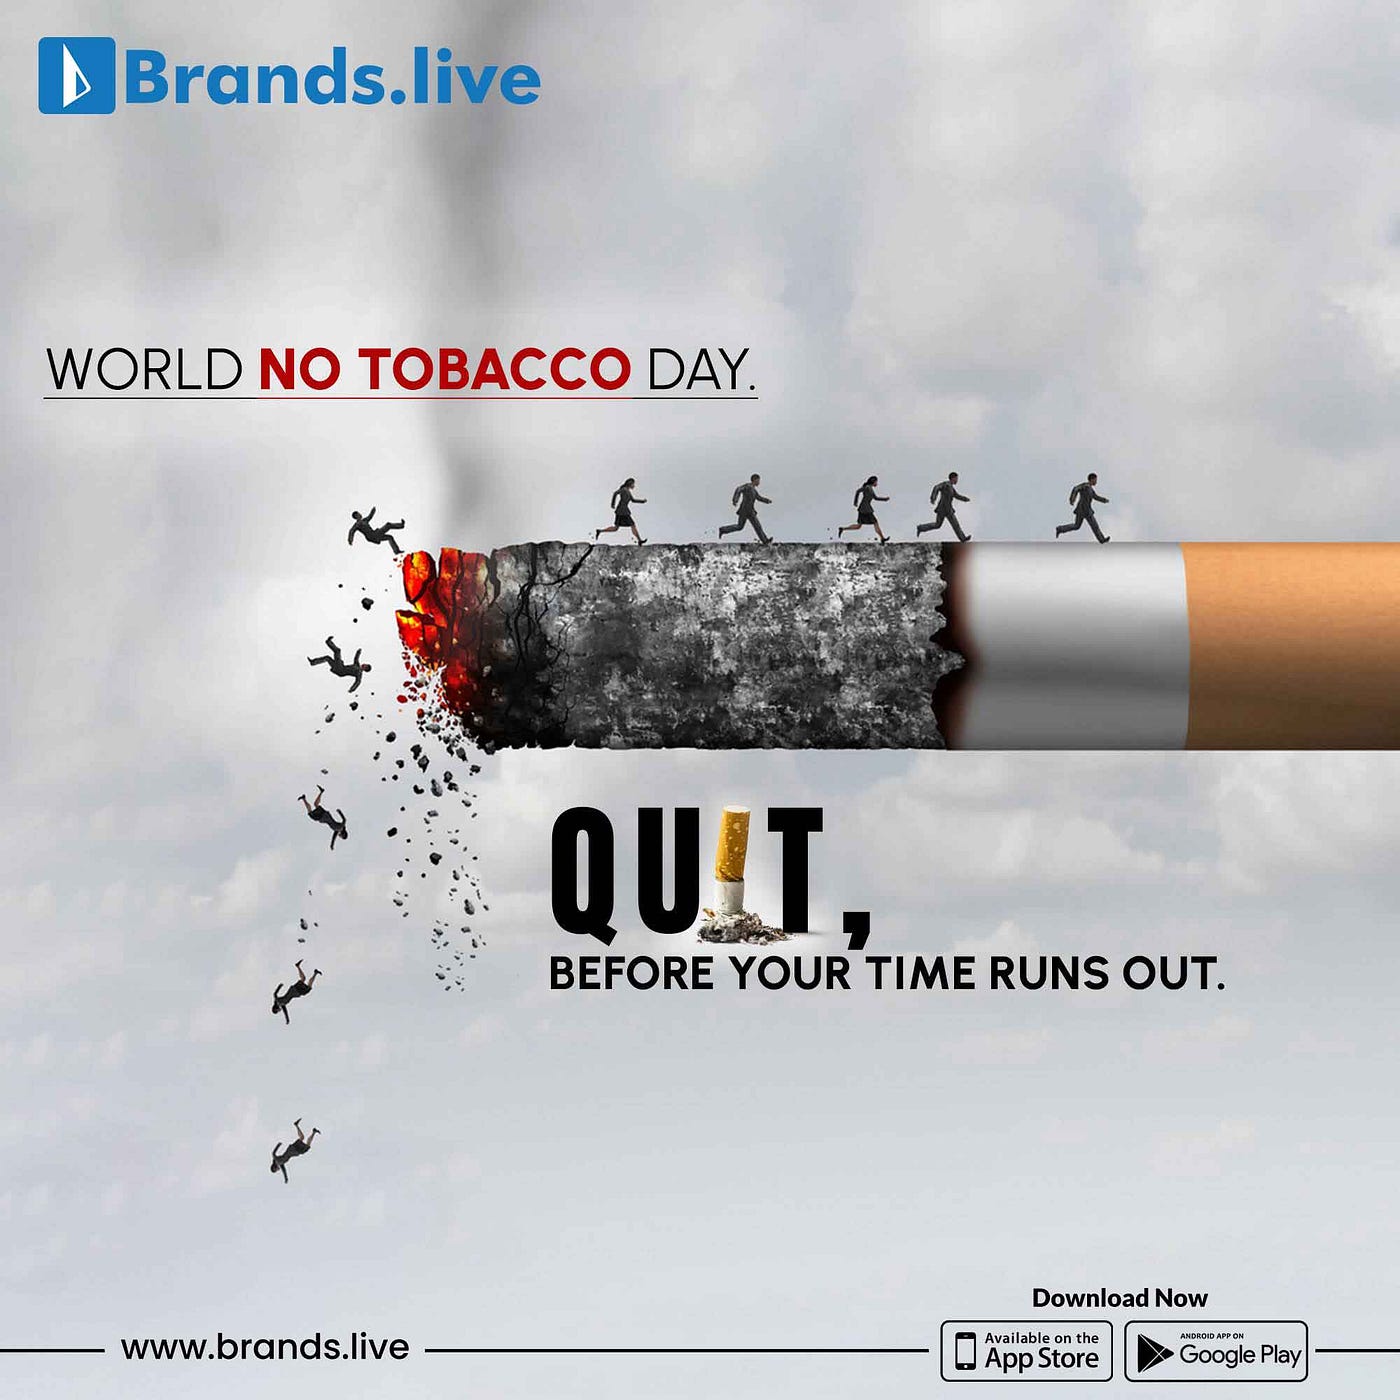 Inspiring Action for Tobacco Control: Uniting for a Smoke-Free Society,  Celebrating World No Tobacco Day | by Brands.live | Medium